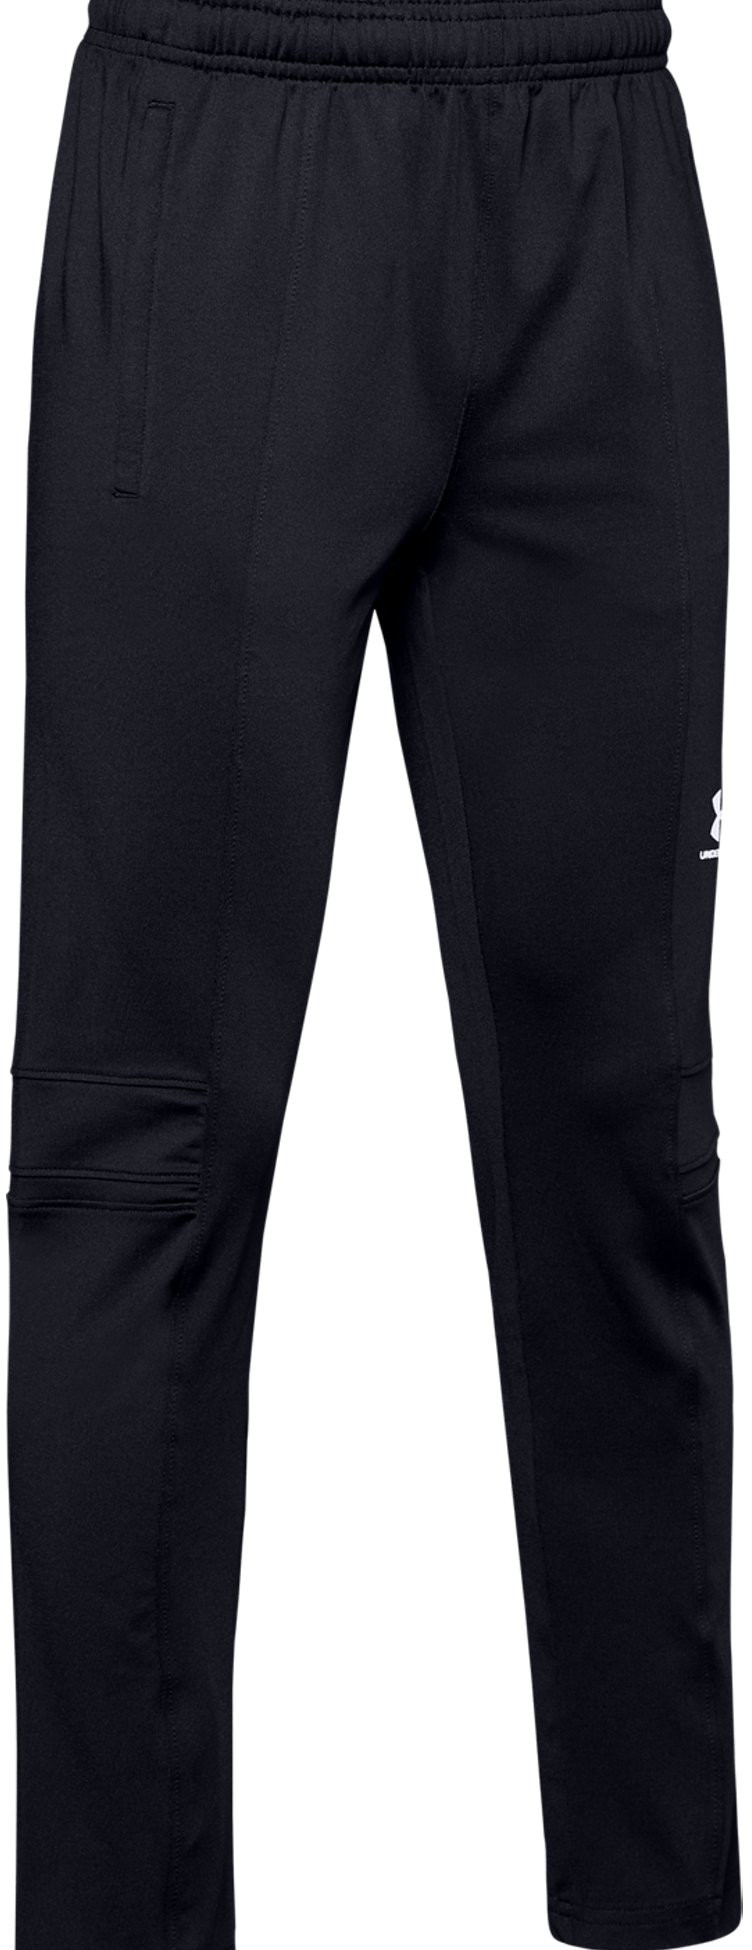 Hose Under Armour Y Challenger III Train Pant